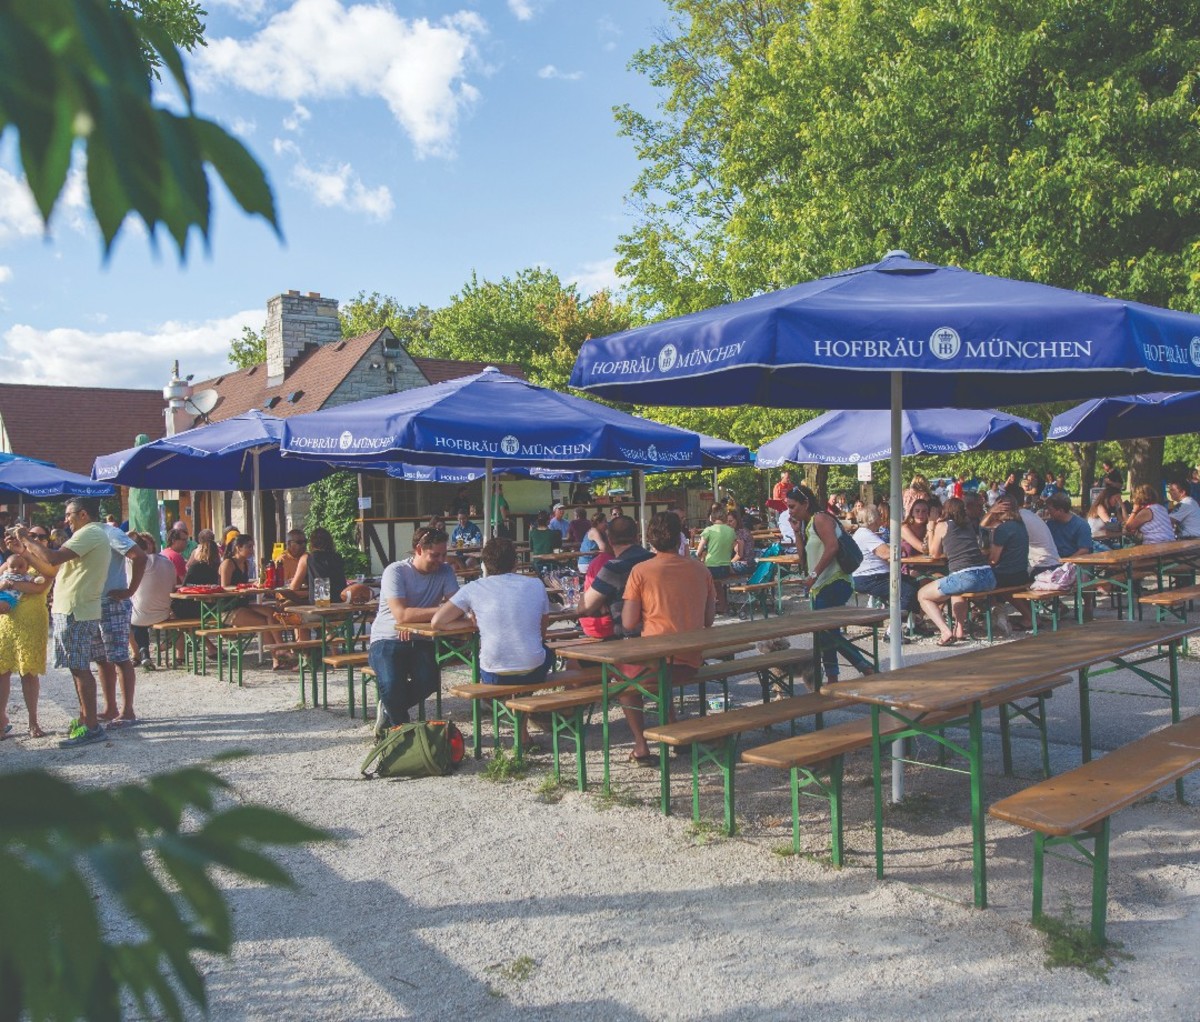 When Estabrook Beer Garden first debuted, it marked America’s first truly public beer garden in nearly 100 years.